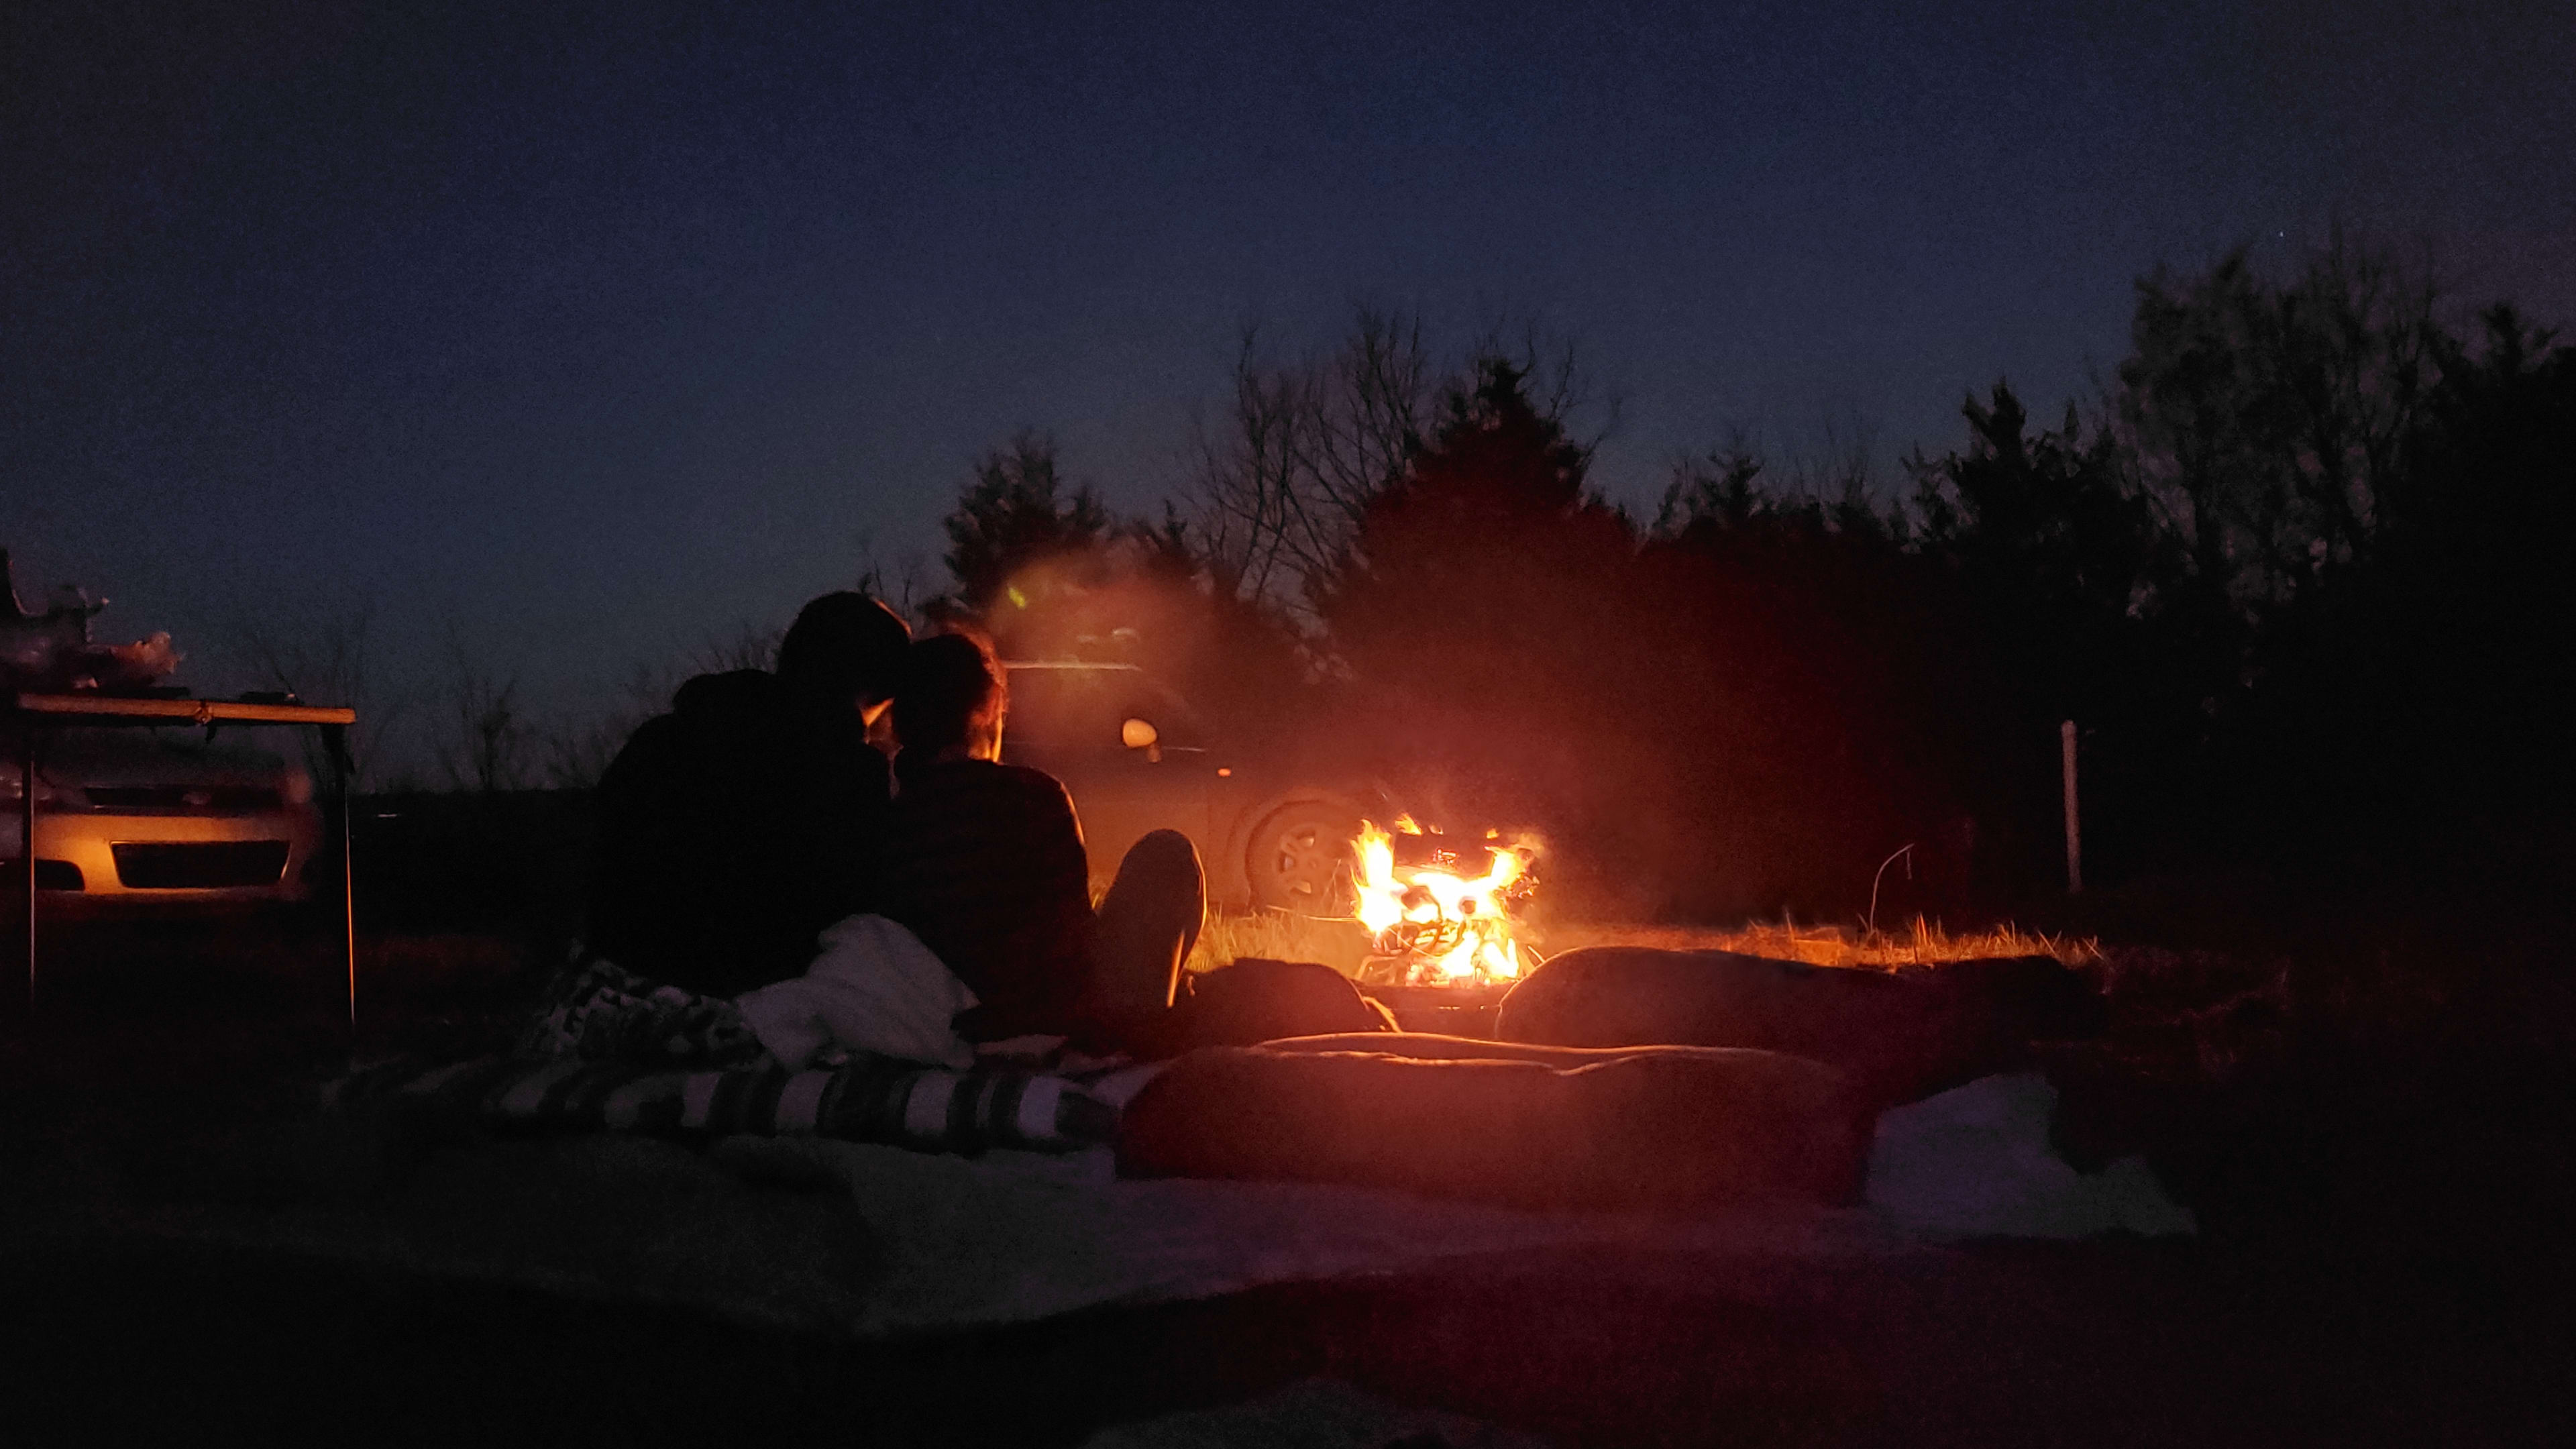 Gazing at the stars, cuddled up to the fire at site 3